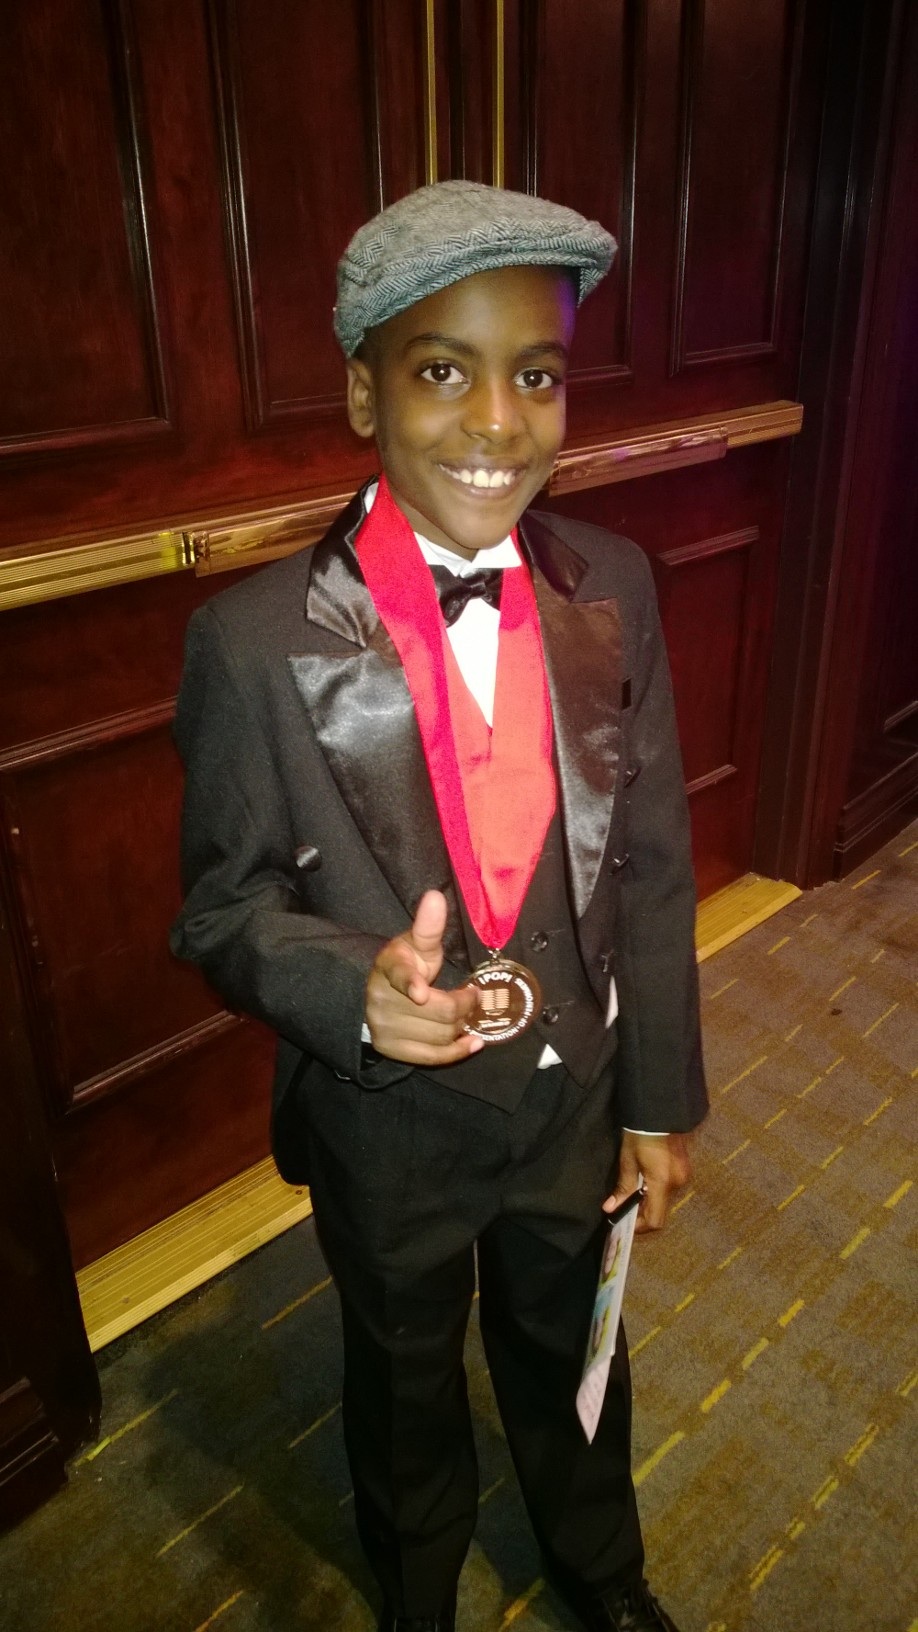 Jr Actor of the Year, 1st Runner Up